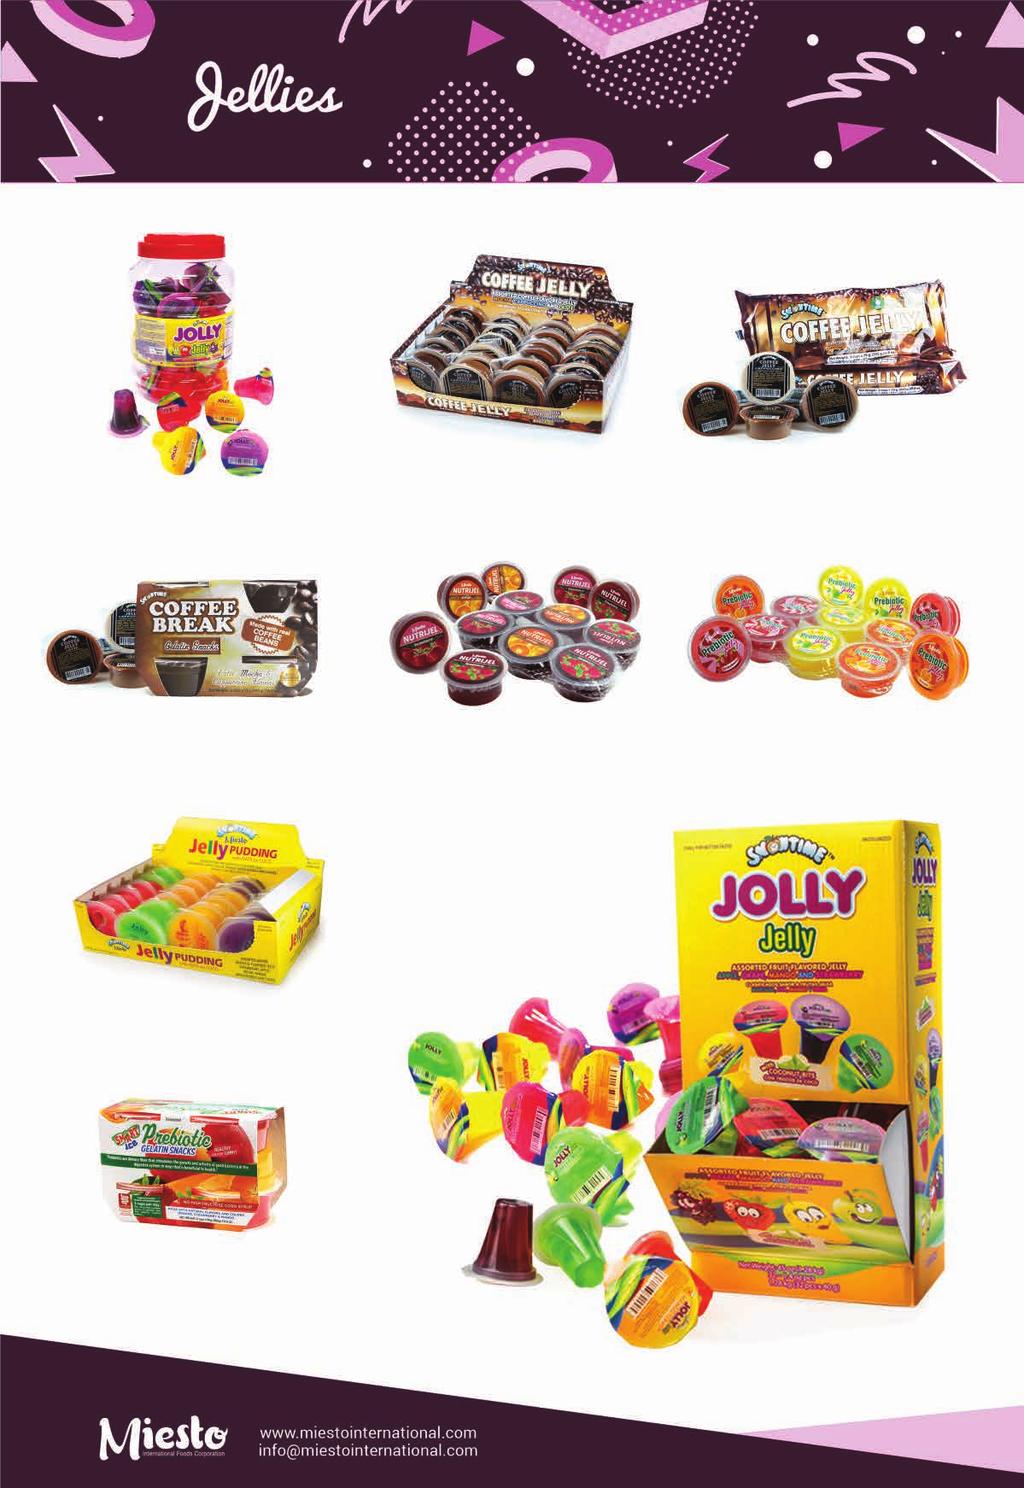 Jellies Jolly Jelly in Jar Packing: 6 jars x 38 pcs. x 40 g. Loadability: 729 cases/20 footer Coffee Jelly Display Packing: 4 innerboxes x 24 pcs. x 80 g.